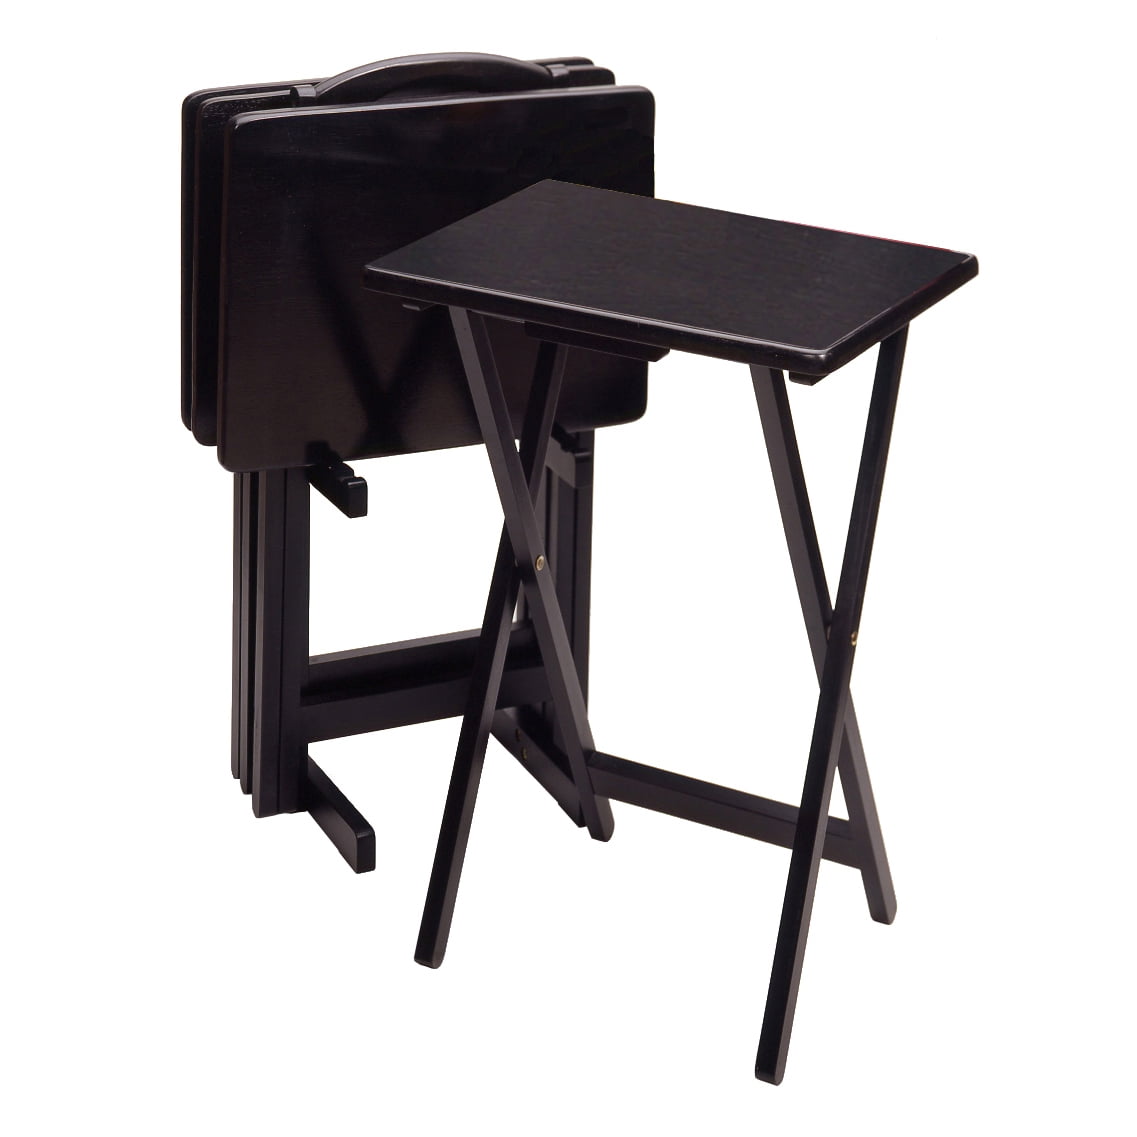 Home Office Desk Can Be Raised And Lowered Folding TV Tray Black/Gold Table 